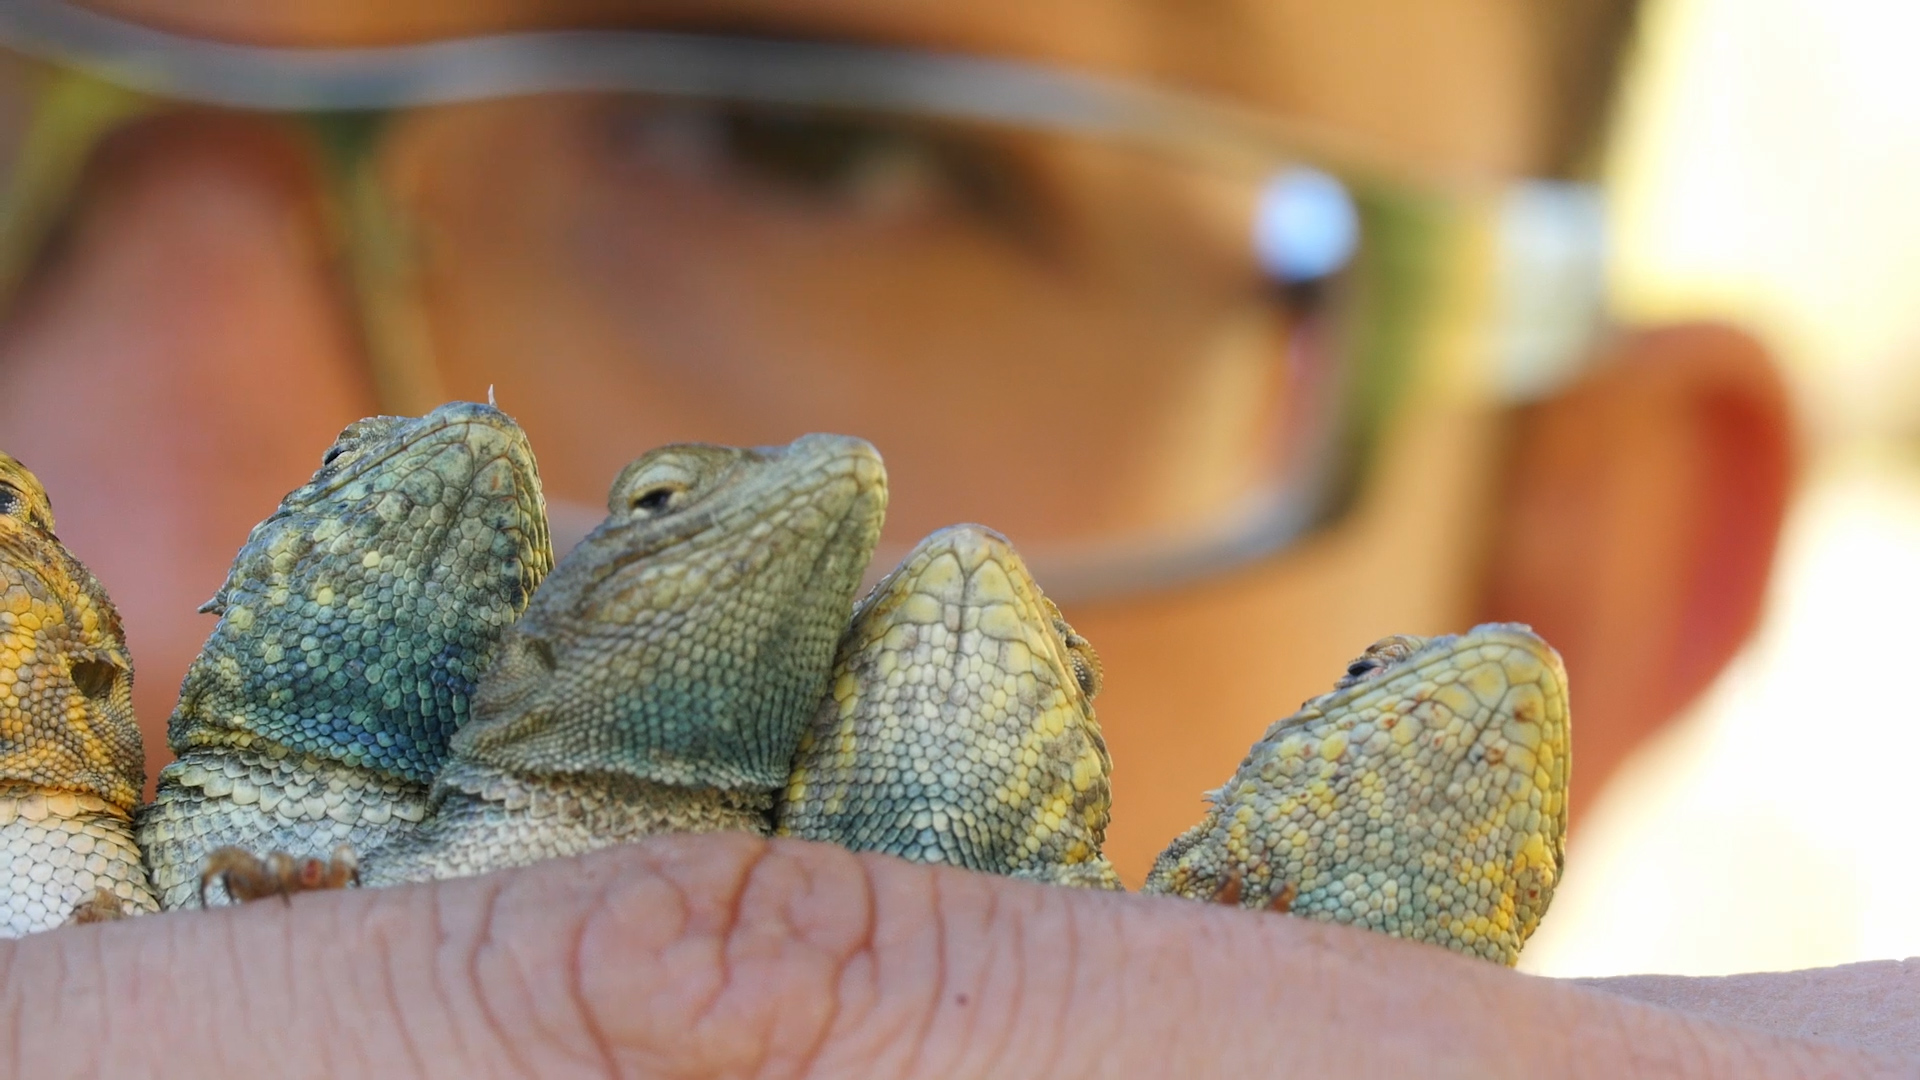 Rafa Lara, a member of the UC Santa Cruz research team, looks at the variation in throat color while collecting side-blotched lizards 